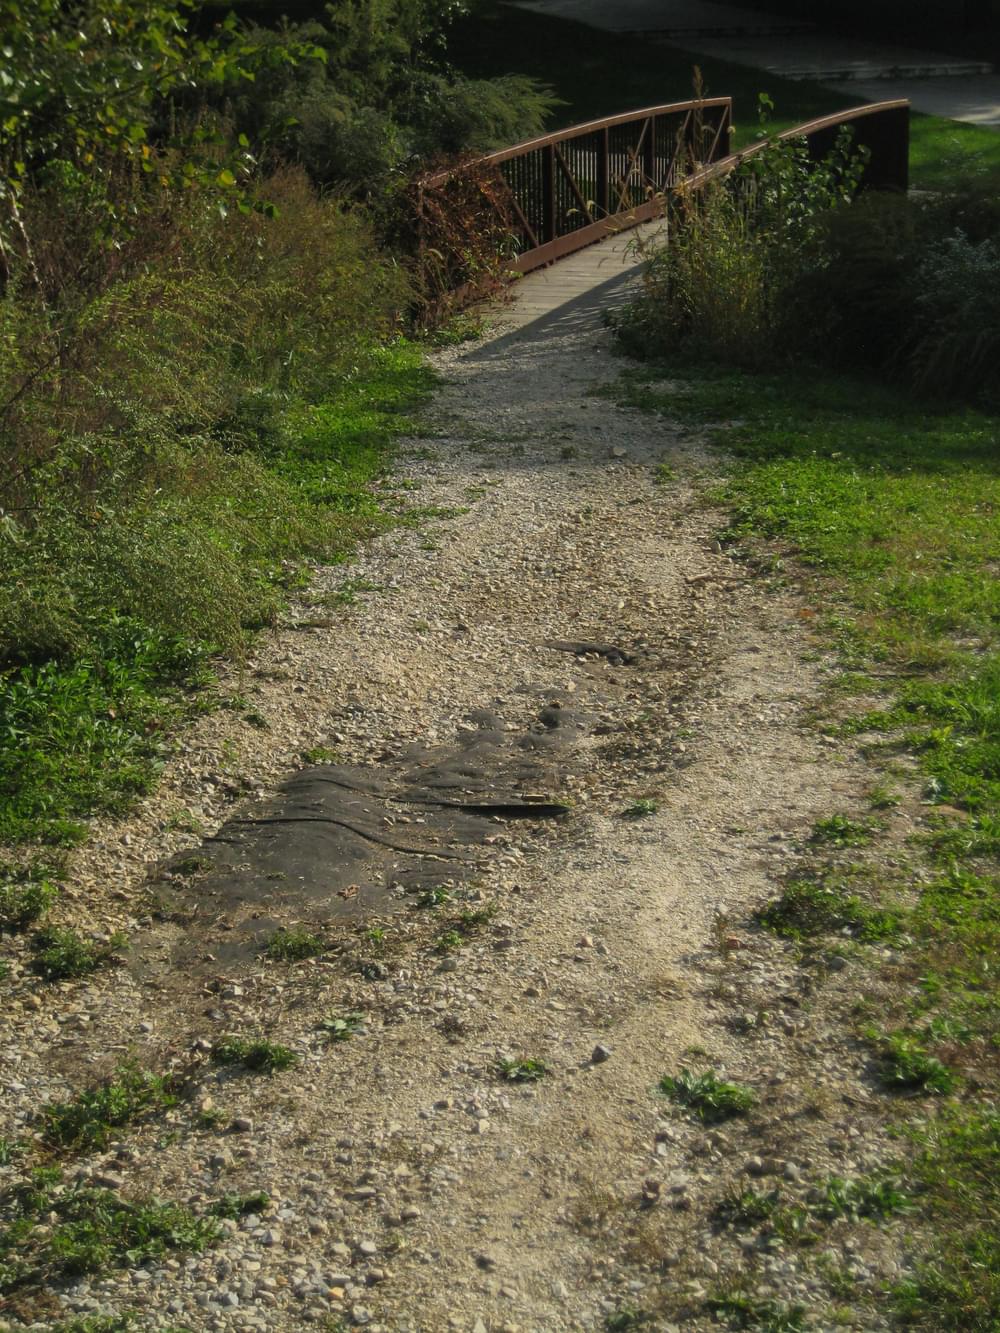 The landscape fabric is exposed in this Philadelphia park due to runoff: the trail runs straight down the slope.